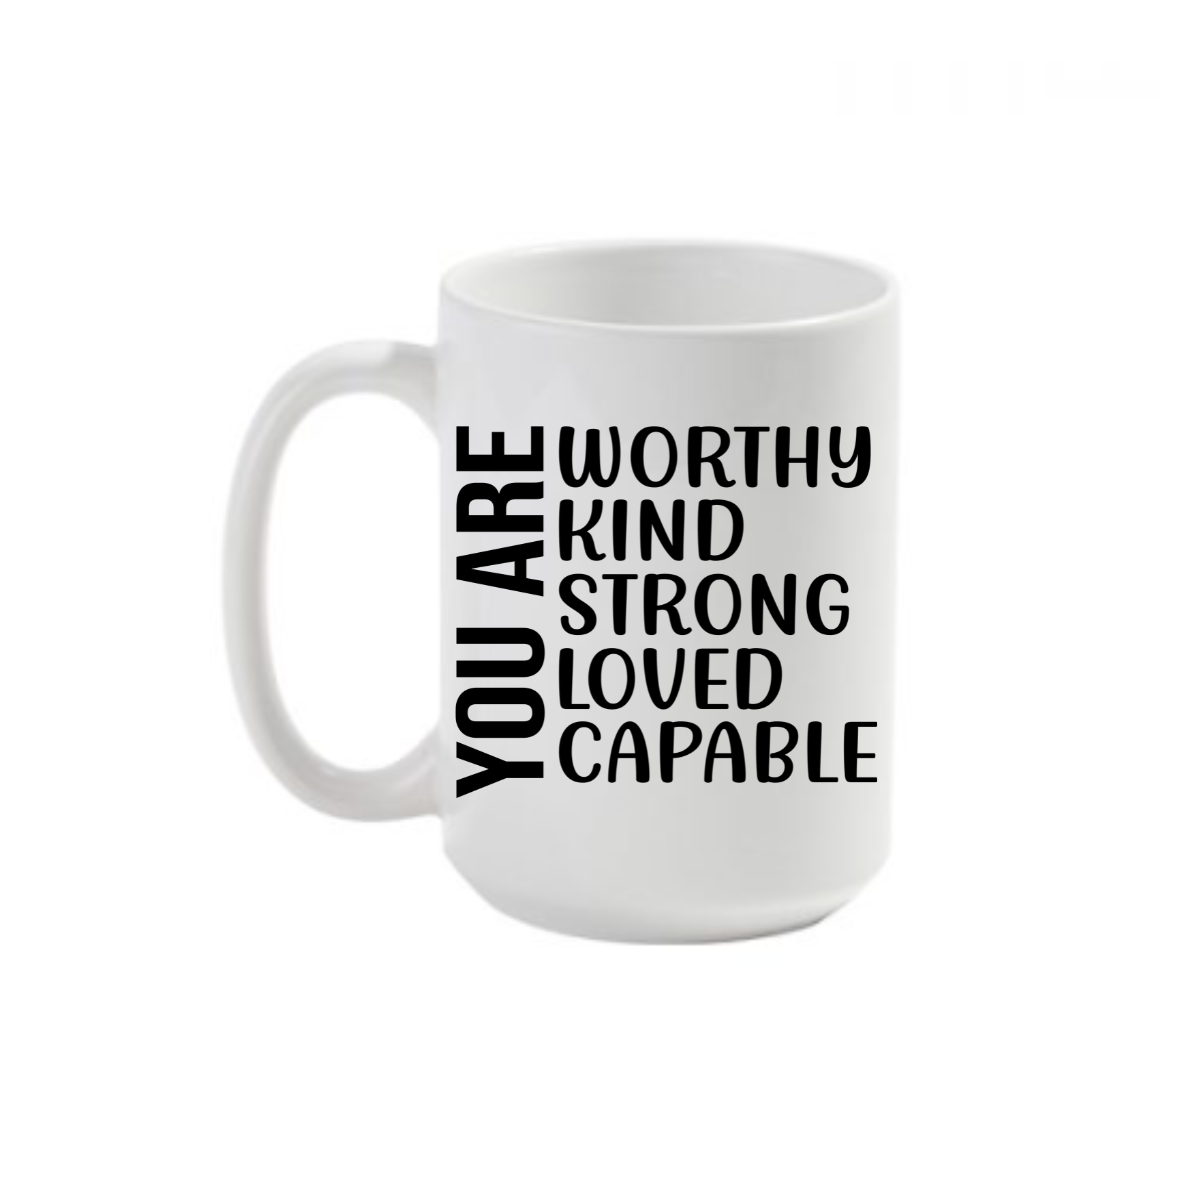 You Are Worthy Kind Strong Loved Capable Mug